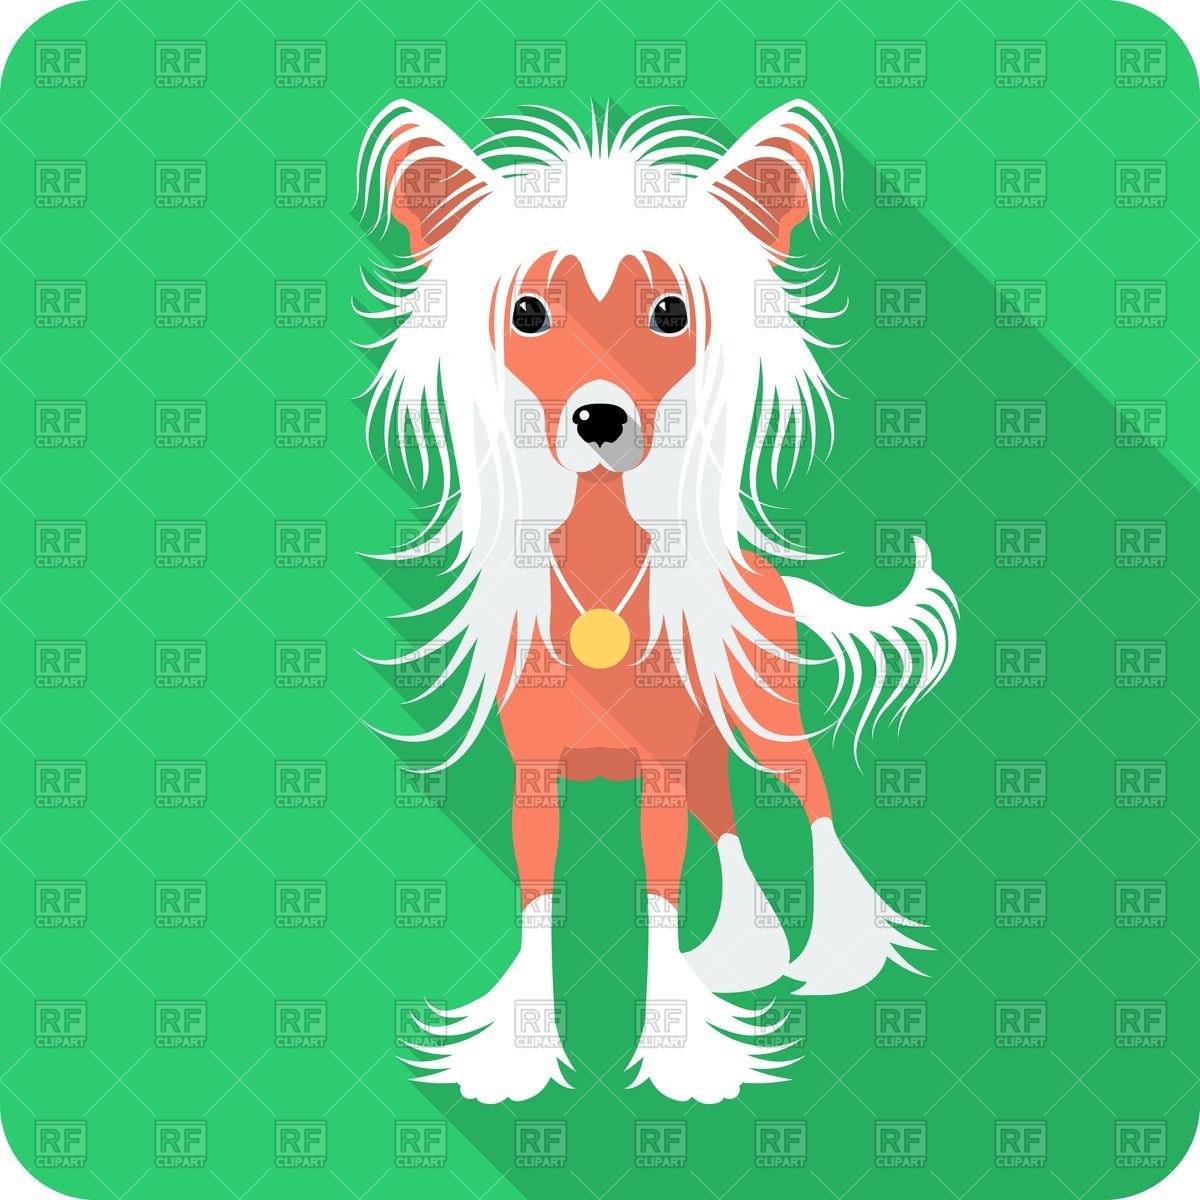 Chinese Crested Dog clipart #1, Download drawings